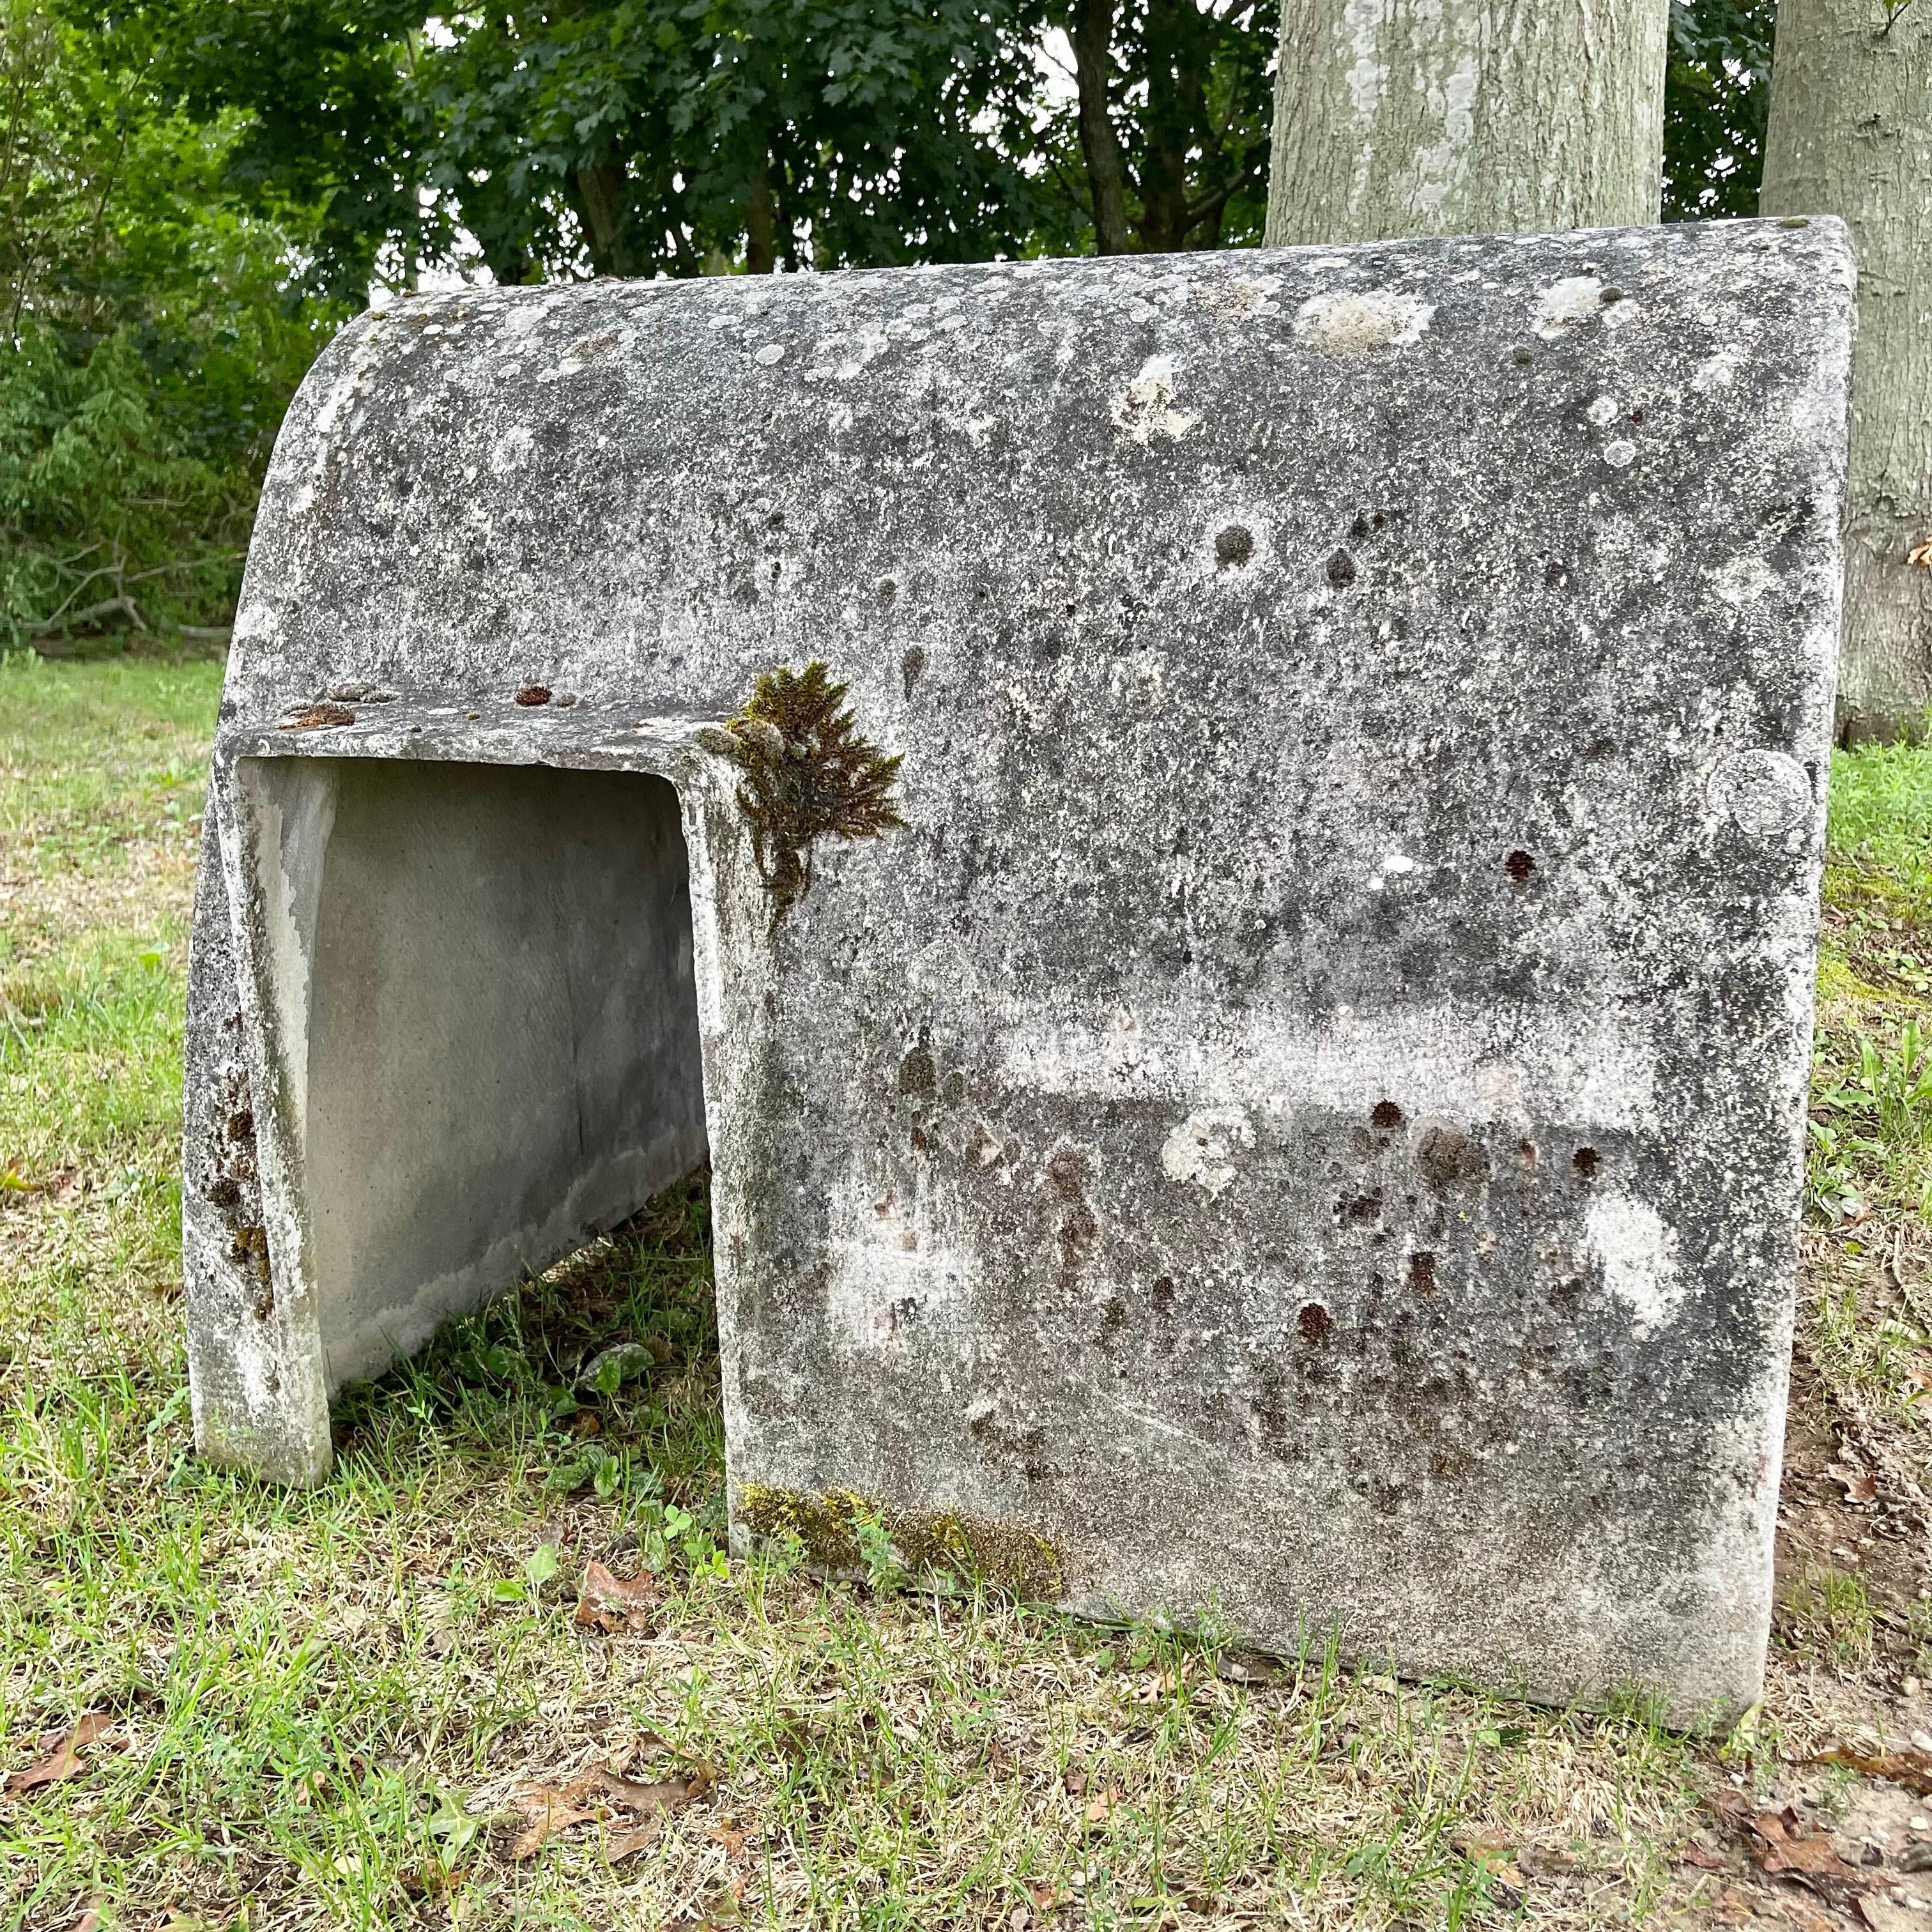 Amazing industrial cement dog kennel by Swiss designer Willy Guhl for Eternit. Large size with dark, heavy patina and lichen. Doggy door opening on left front side. A beautiful minimal design which can be inserted into and elevate almost any design